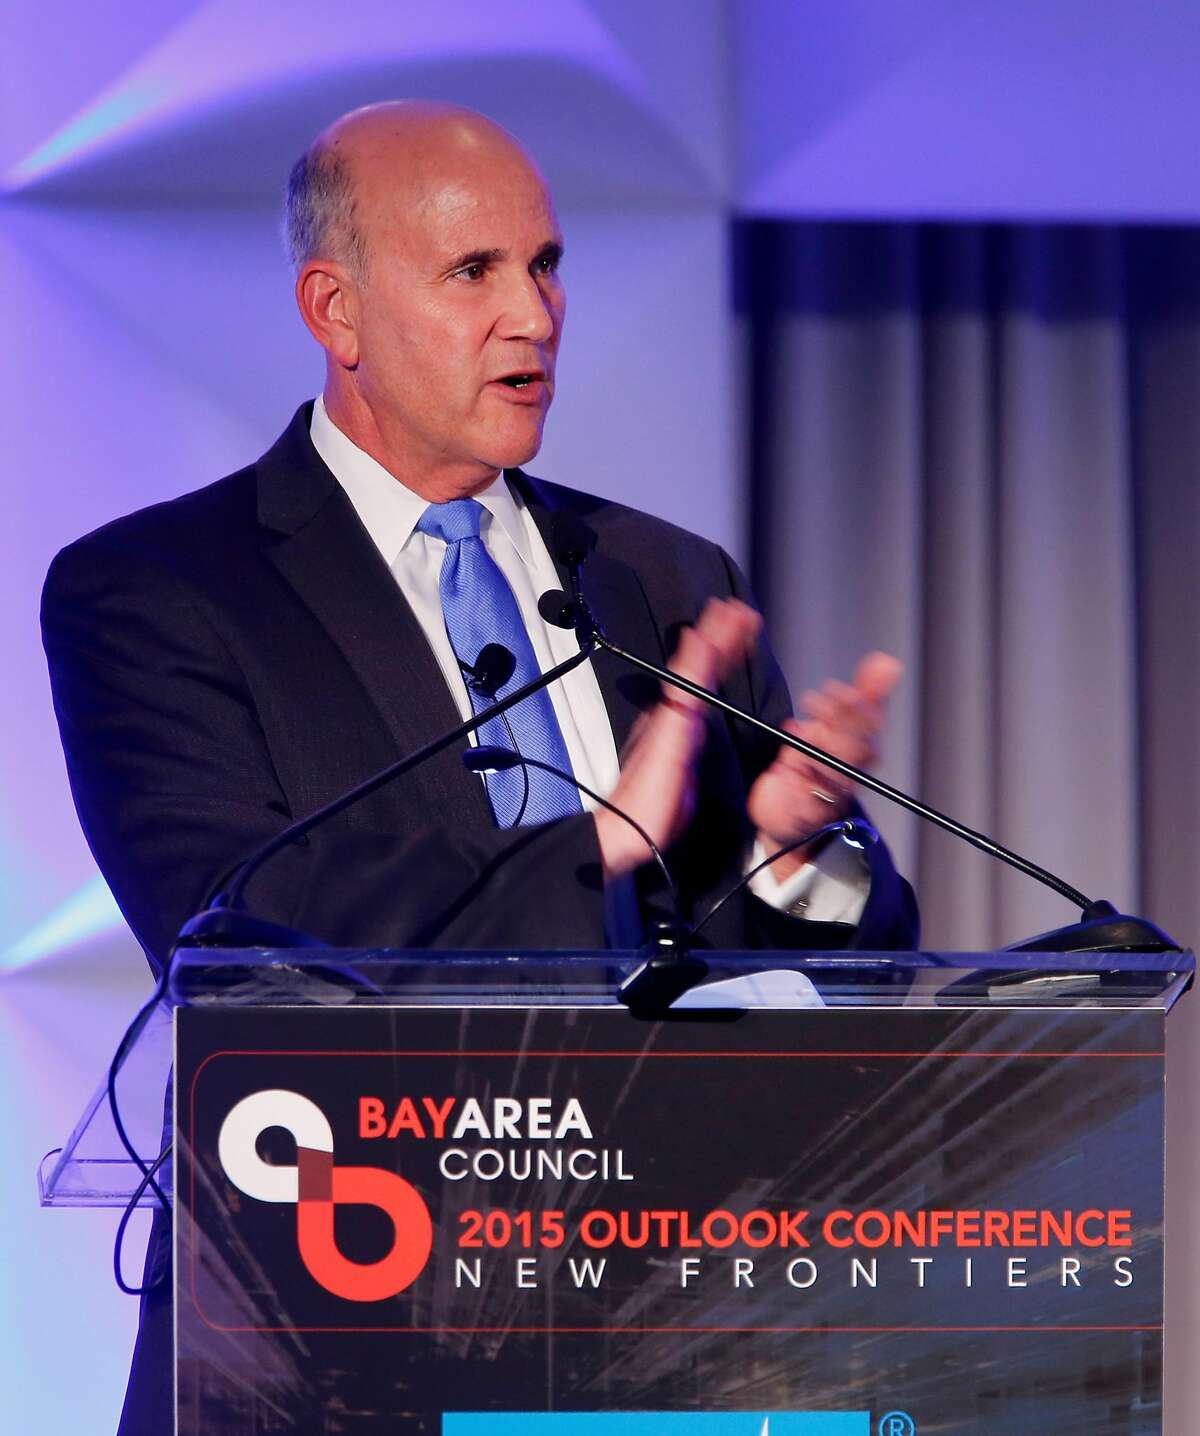 Bay Area Council CEO Jim Wunderman applauded many of the companies that support the council Thursday May 21, 2015. California Governor Jerry Brown was the first speaker at the Bay Area Council meeting discussing regional and statewide economic issues at the Ritz-Carlton hotel in San Francisco, Calif.